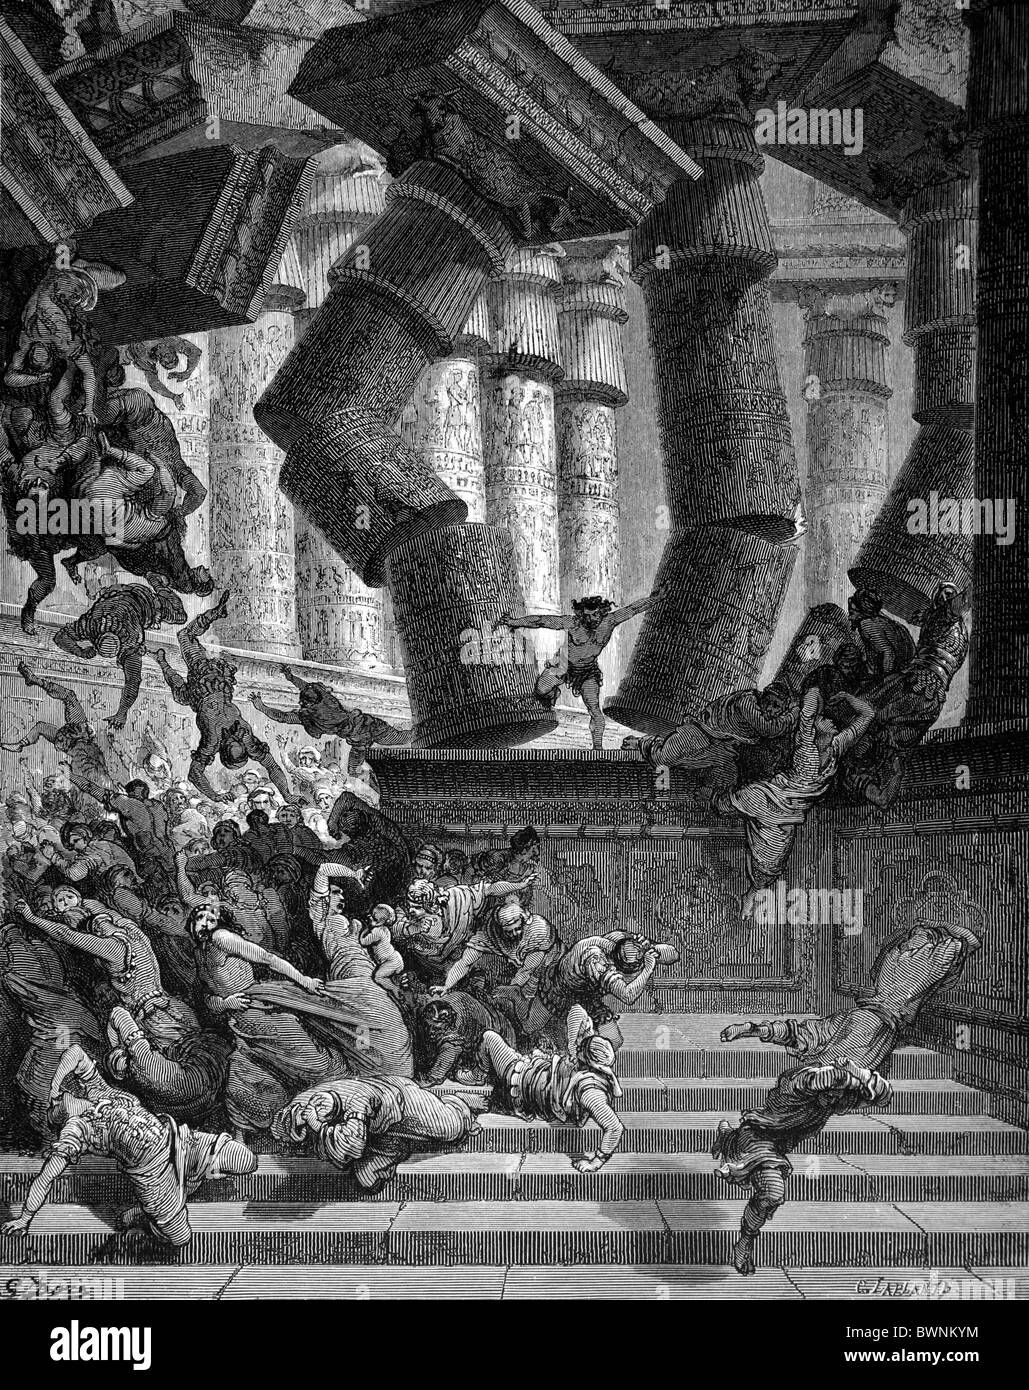 Gustave Doré; Samson destroying the house of the Philistines at Gaza; Black and White Engraving Stock Photo